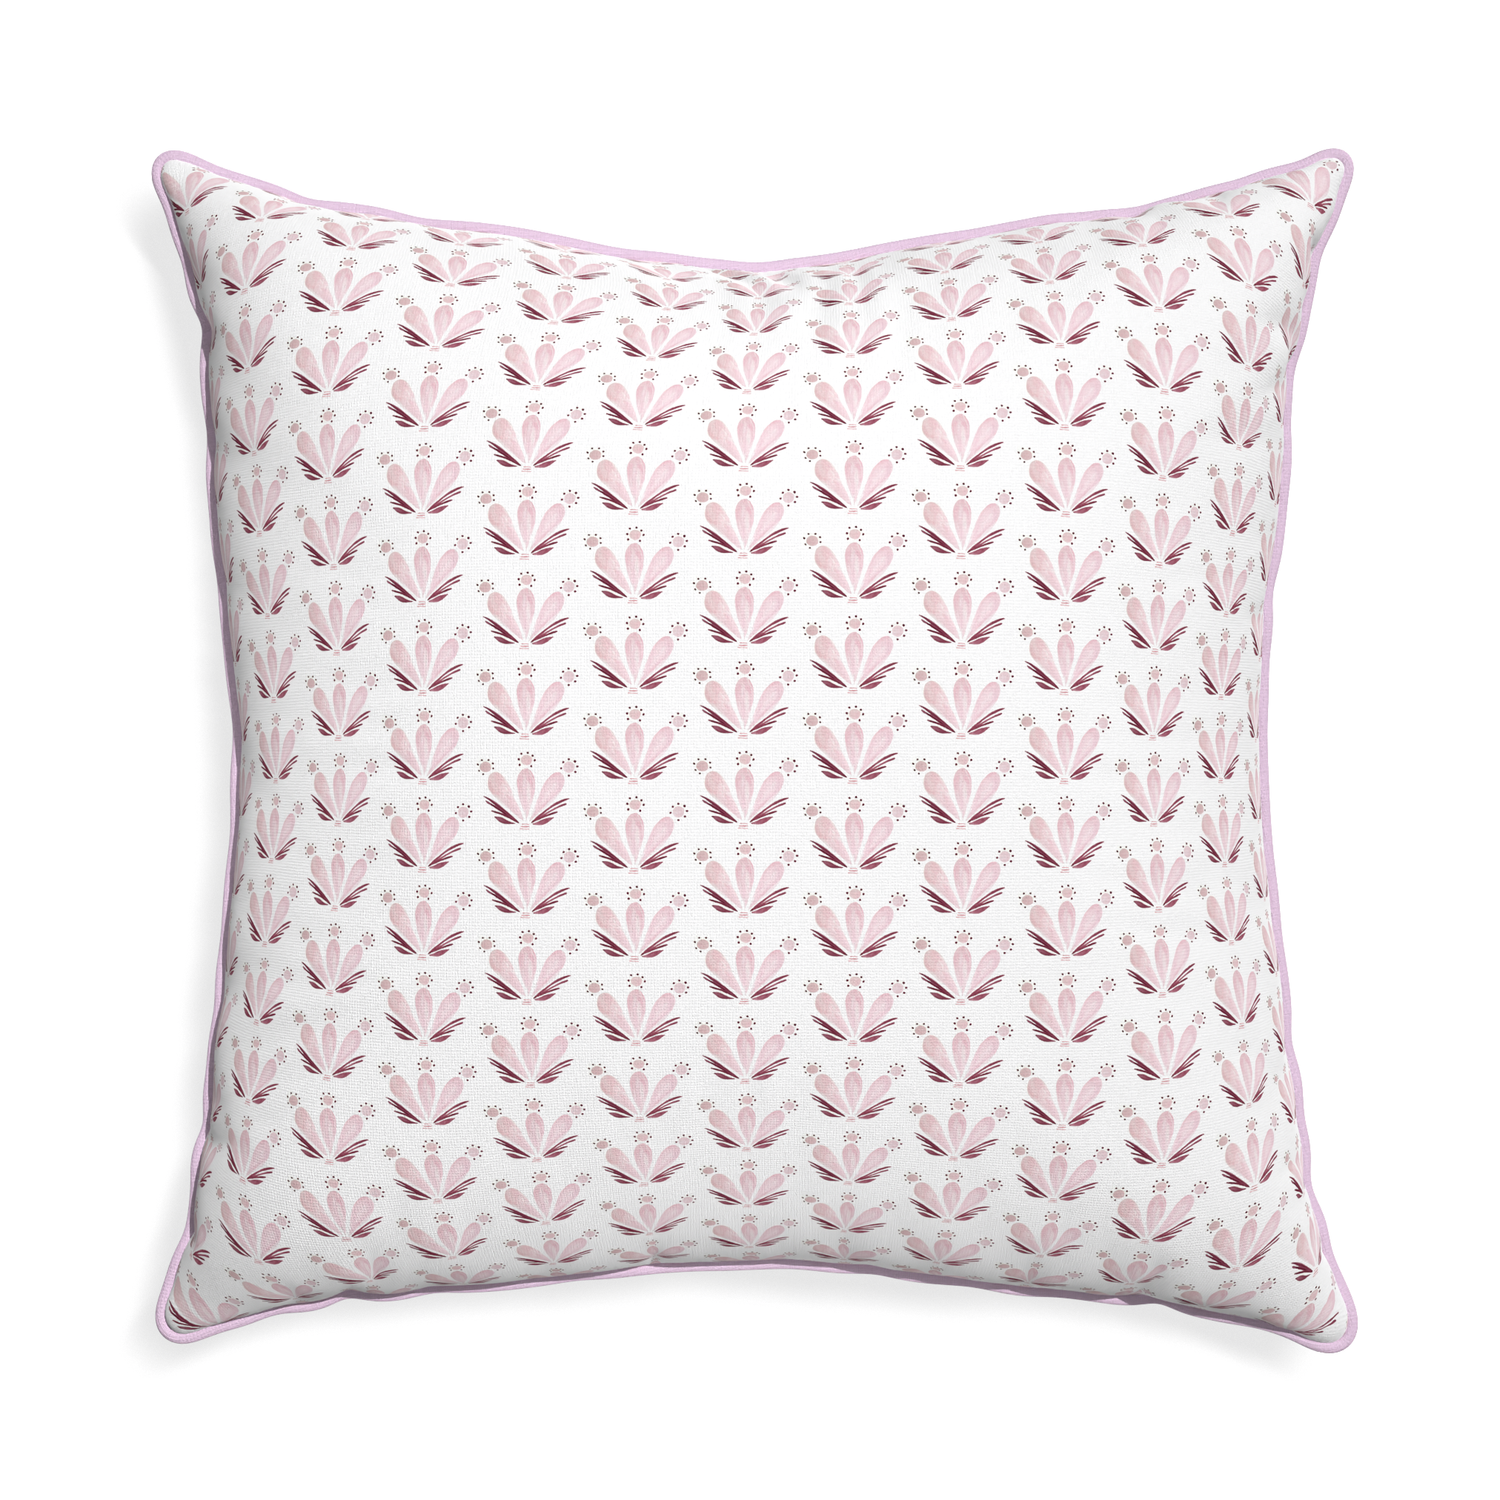 Euro-sham serena pink custom pink & burgundy drop repeat floralpillow with l piping on white background